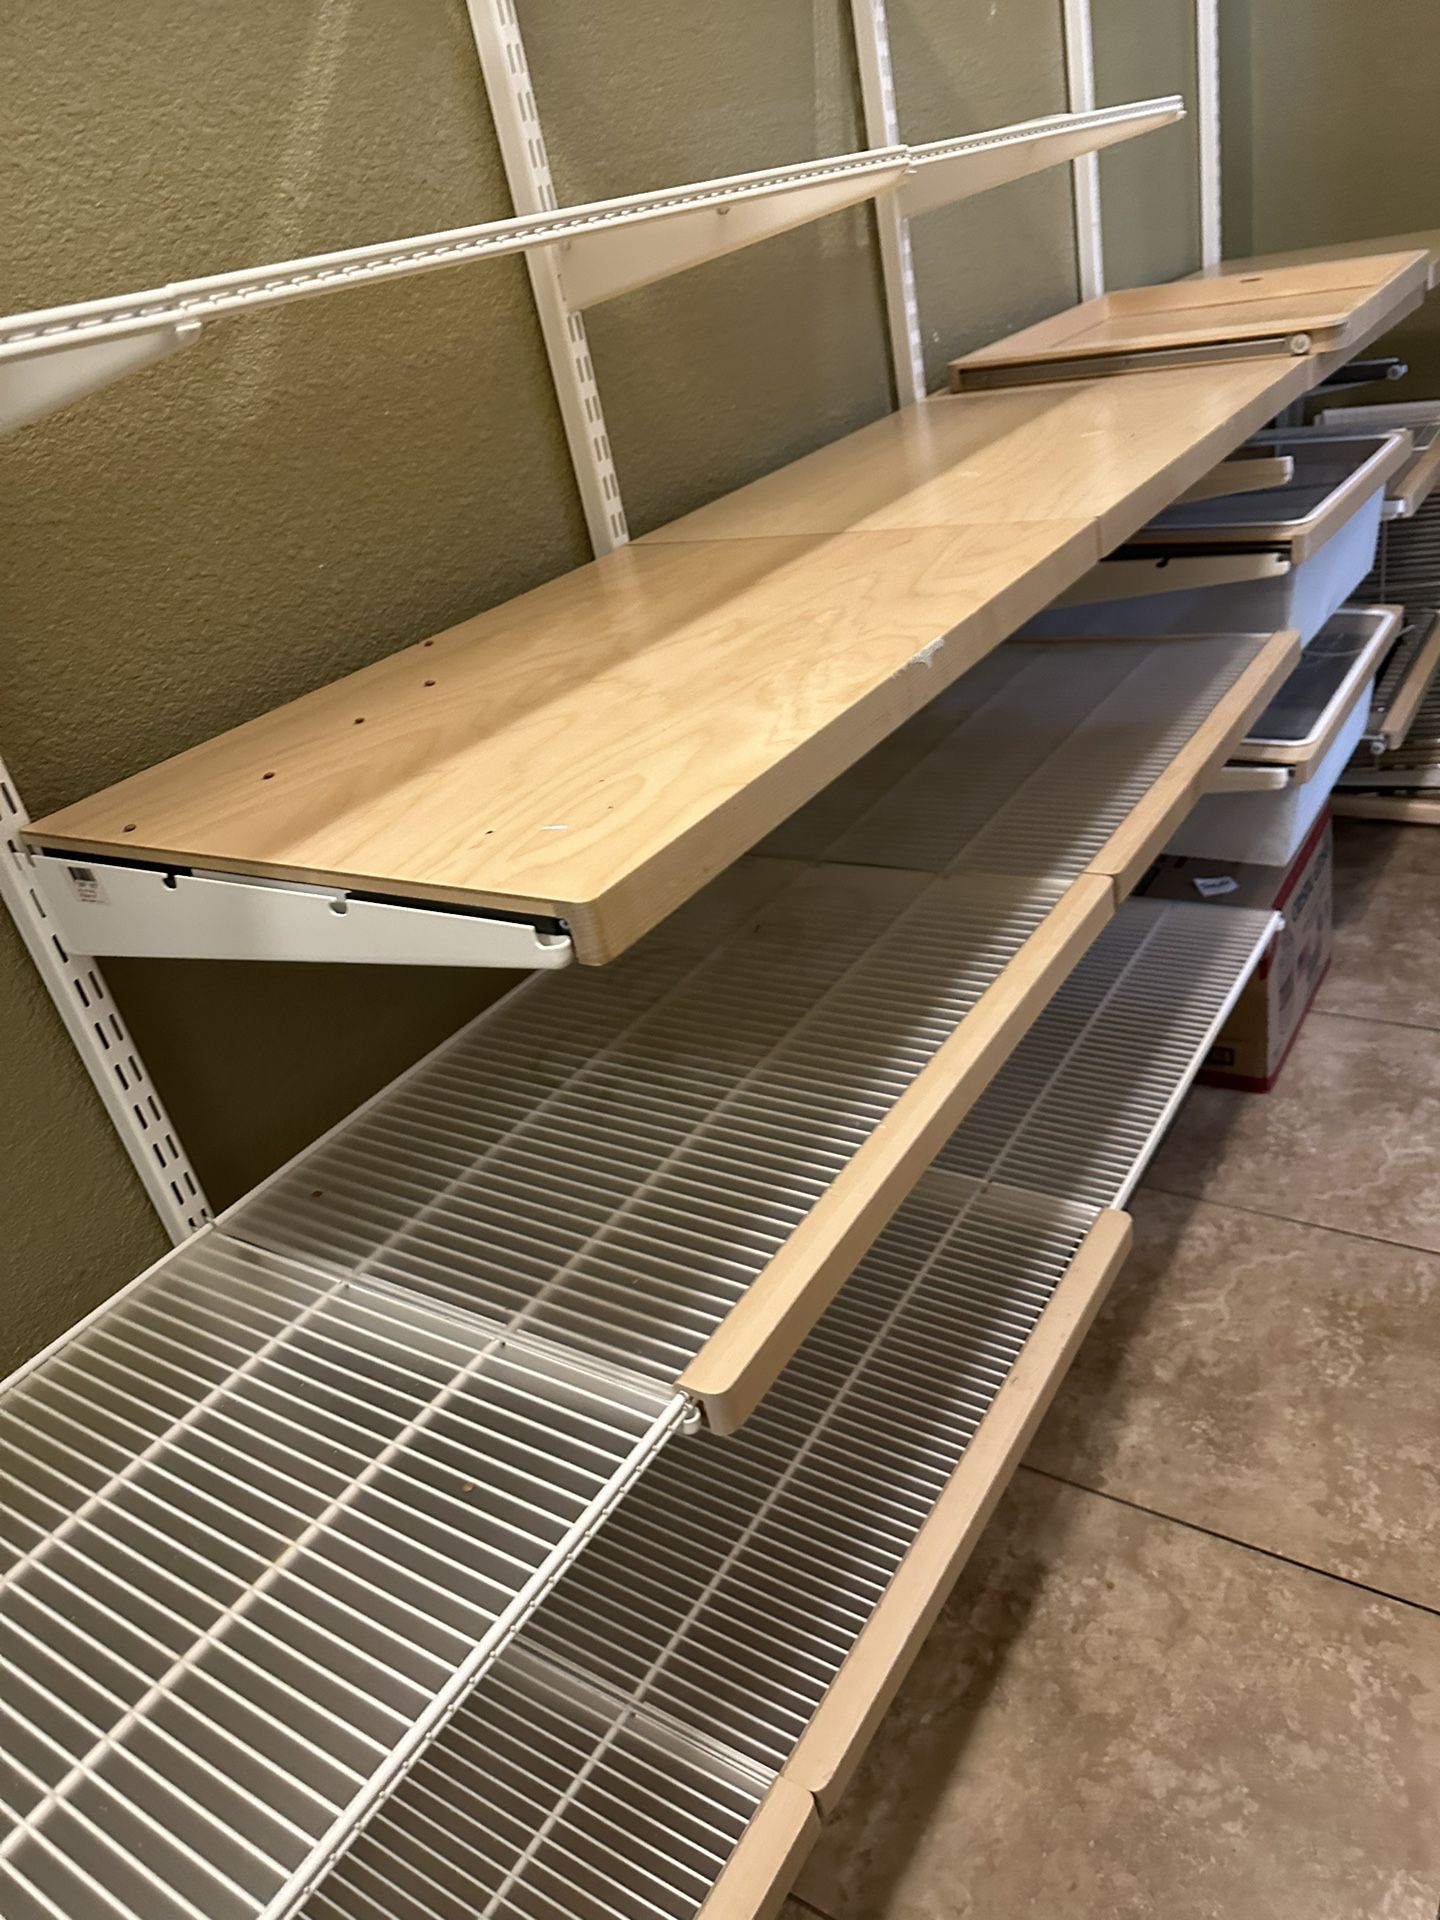 Garage Or Pantry Storage Shelves System In 3-sections 